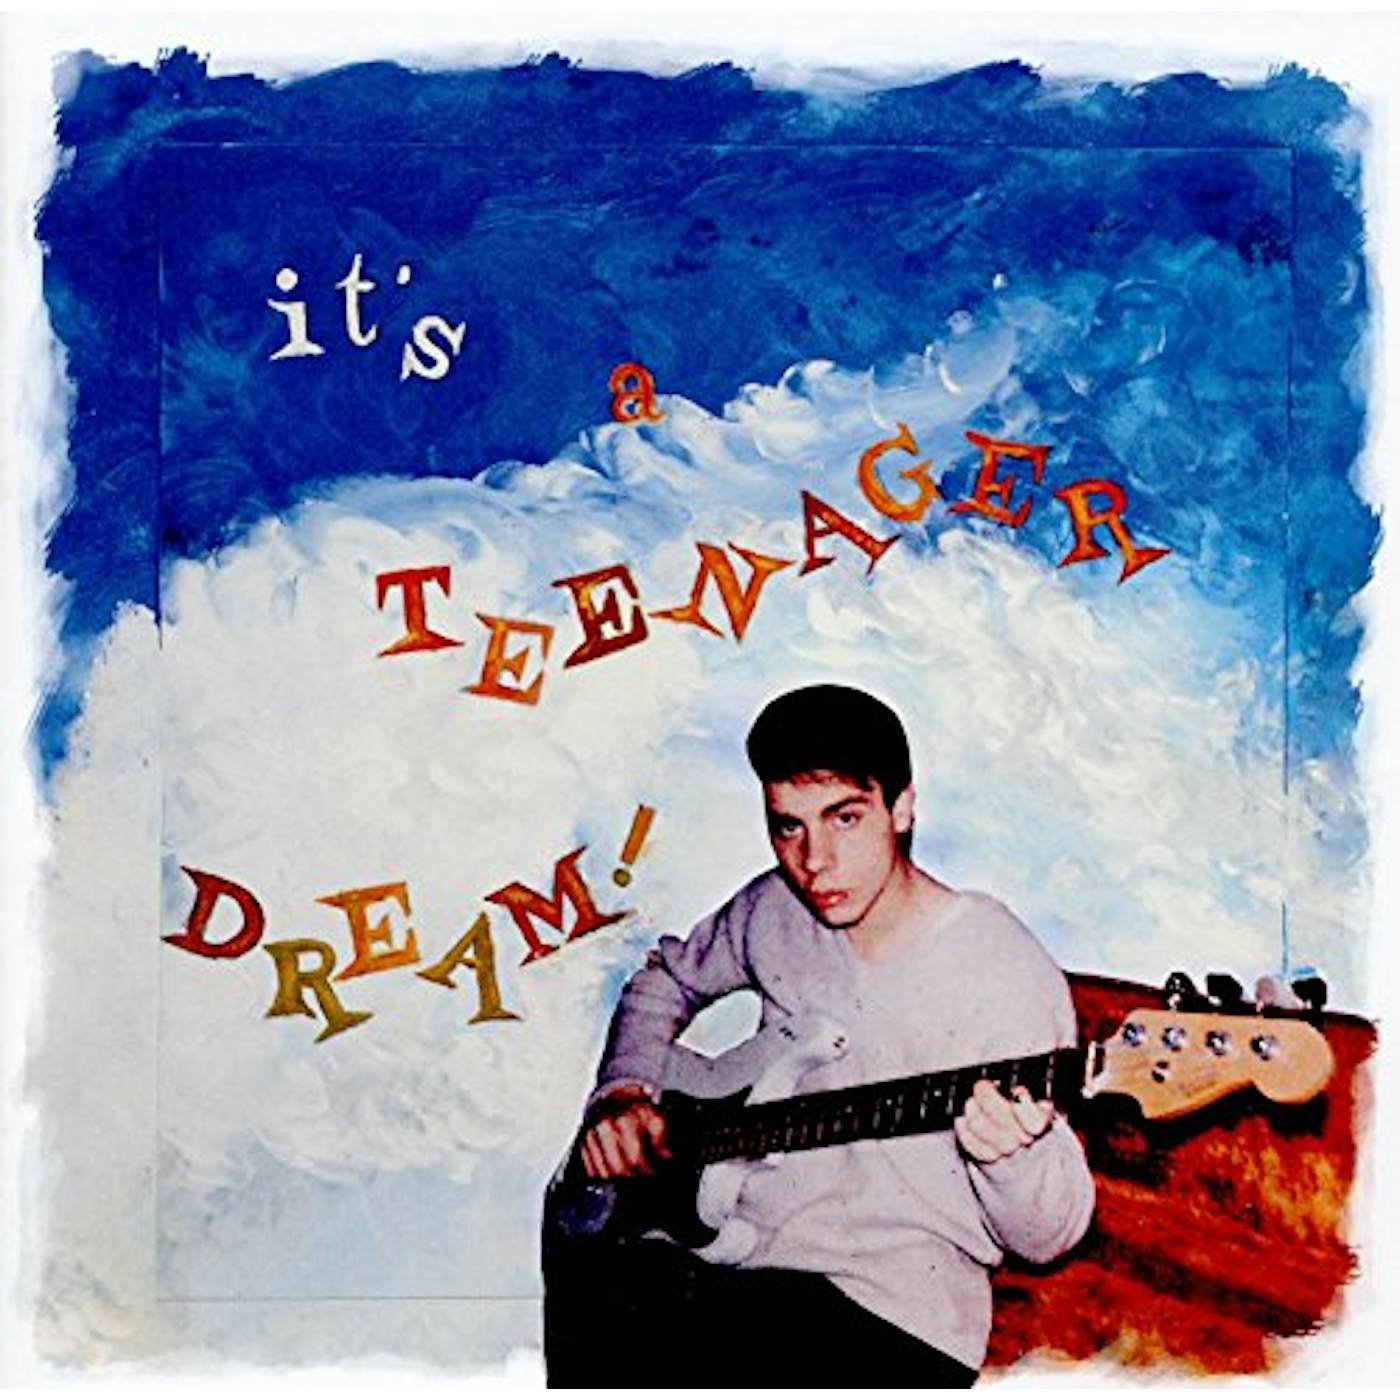 Dominique Blanc-Francard IT'S A TEENAGER DREAM: DELUXE EDITION CD